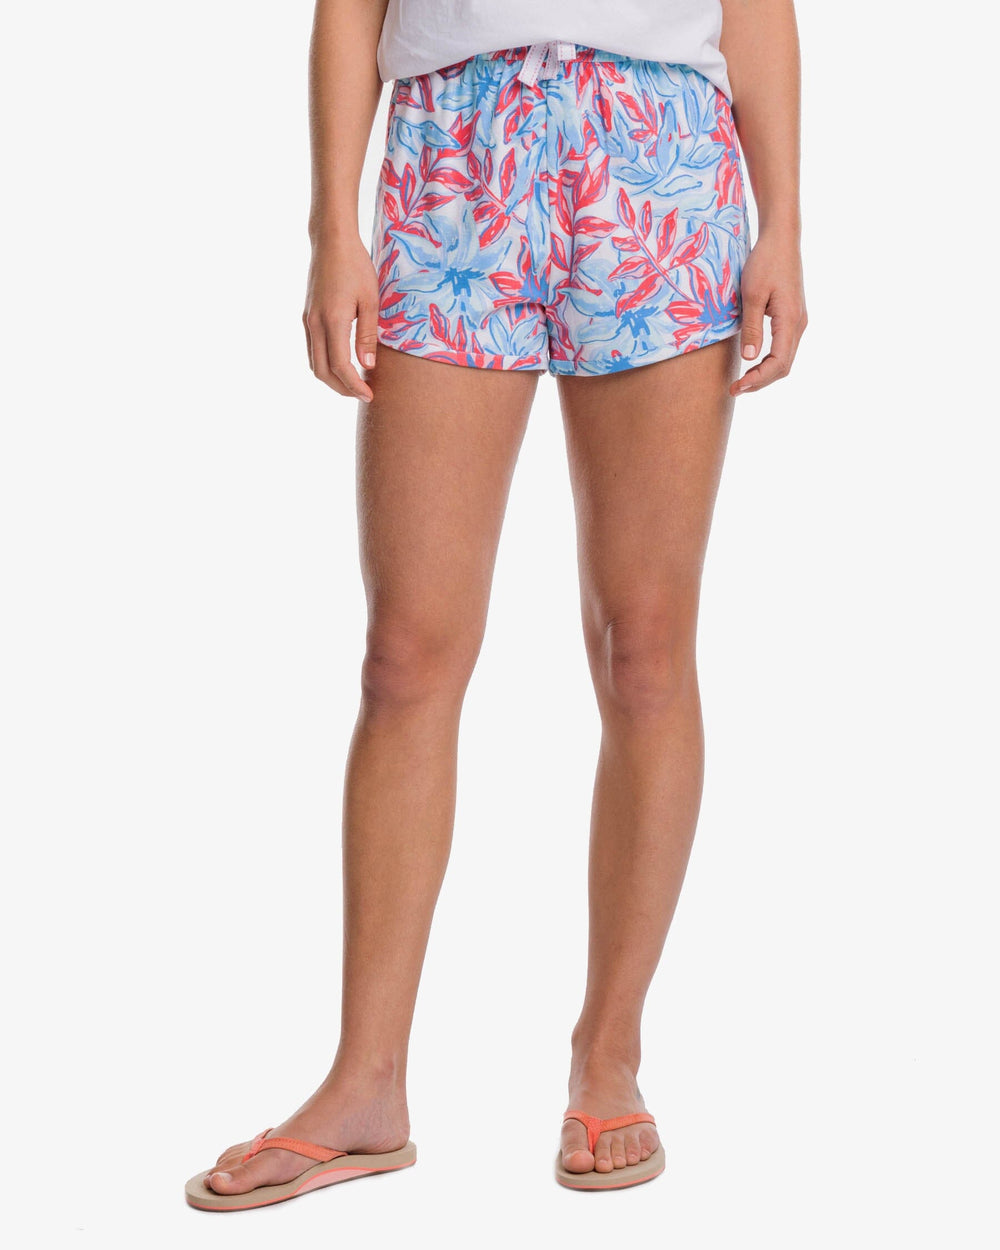 The front view of the Southern Tide Forever Floral Print Lounge Short by Southern Tide - Sunkist Coral